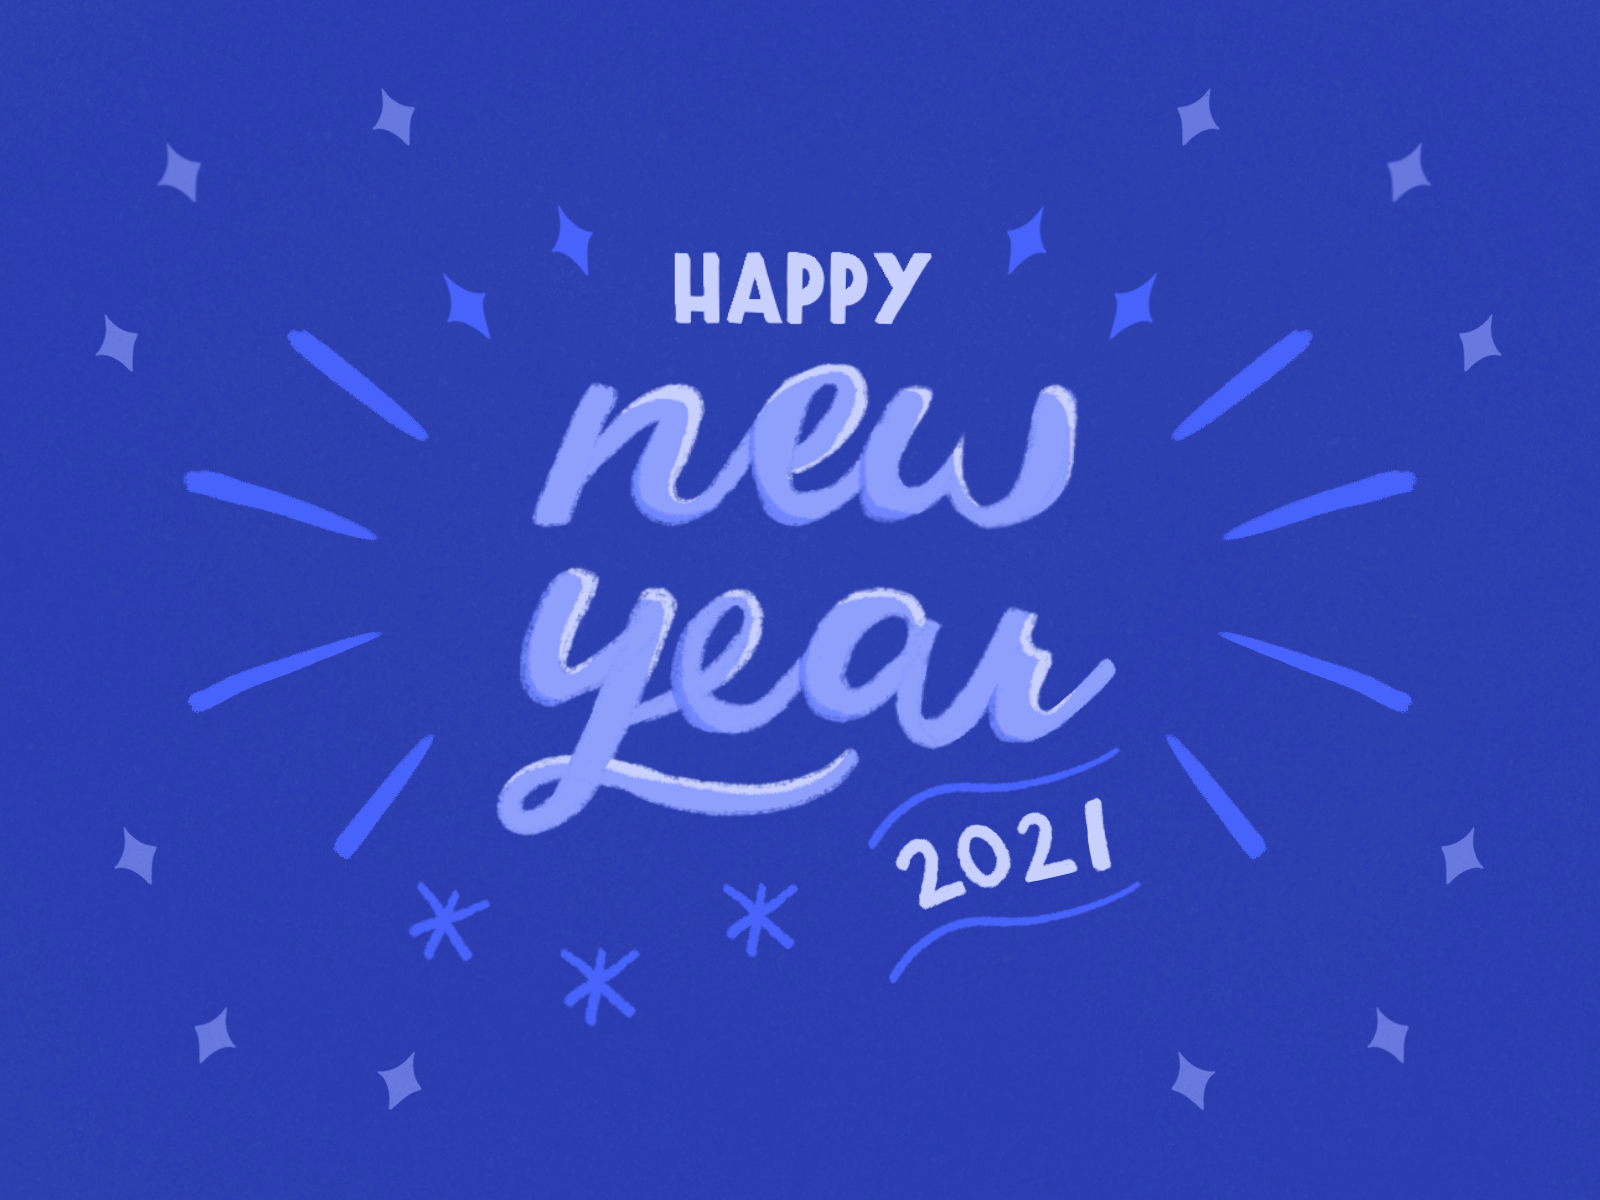 Happy New Year 2020 2021 2d animation animated gif animation cell animation gif hand drawn hand drawn illustration hand drawn type hand lettering handdrawn handdrawn type handlettering happy new year lettering new year procreate skillshare skillshare class